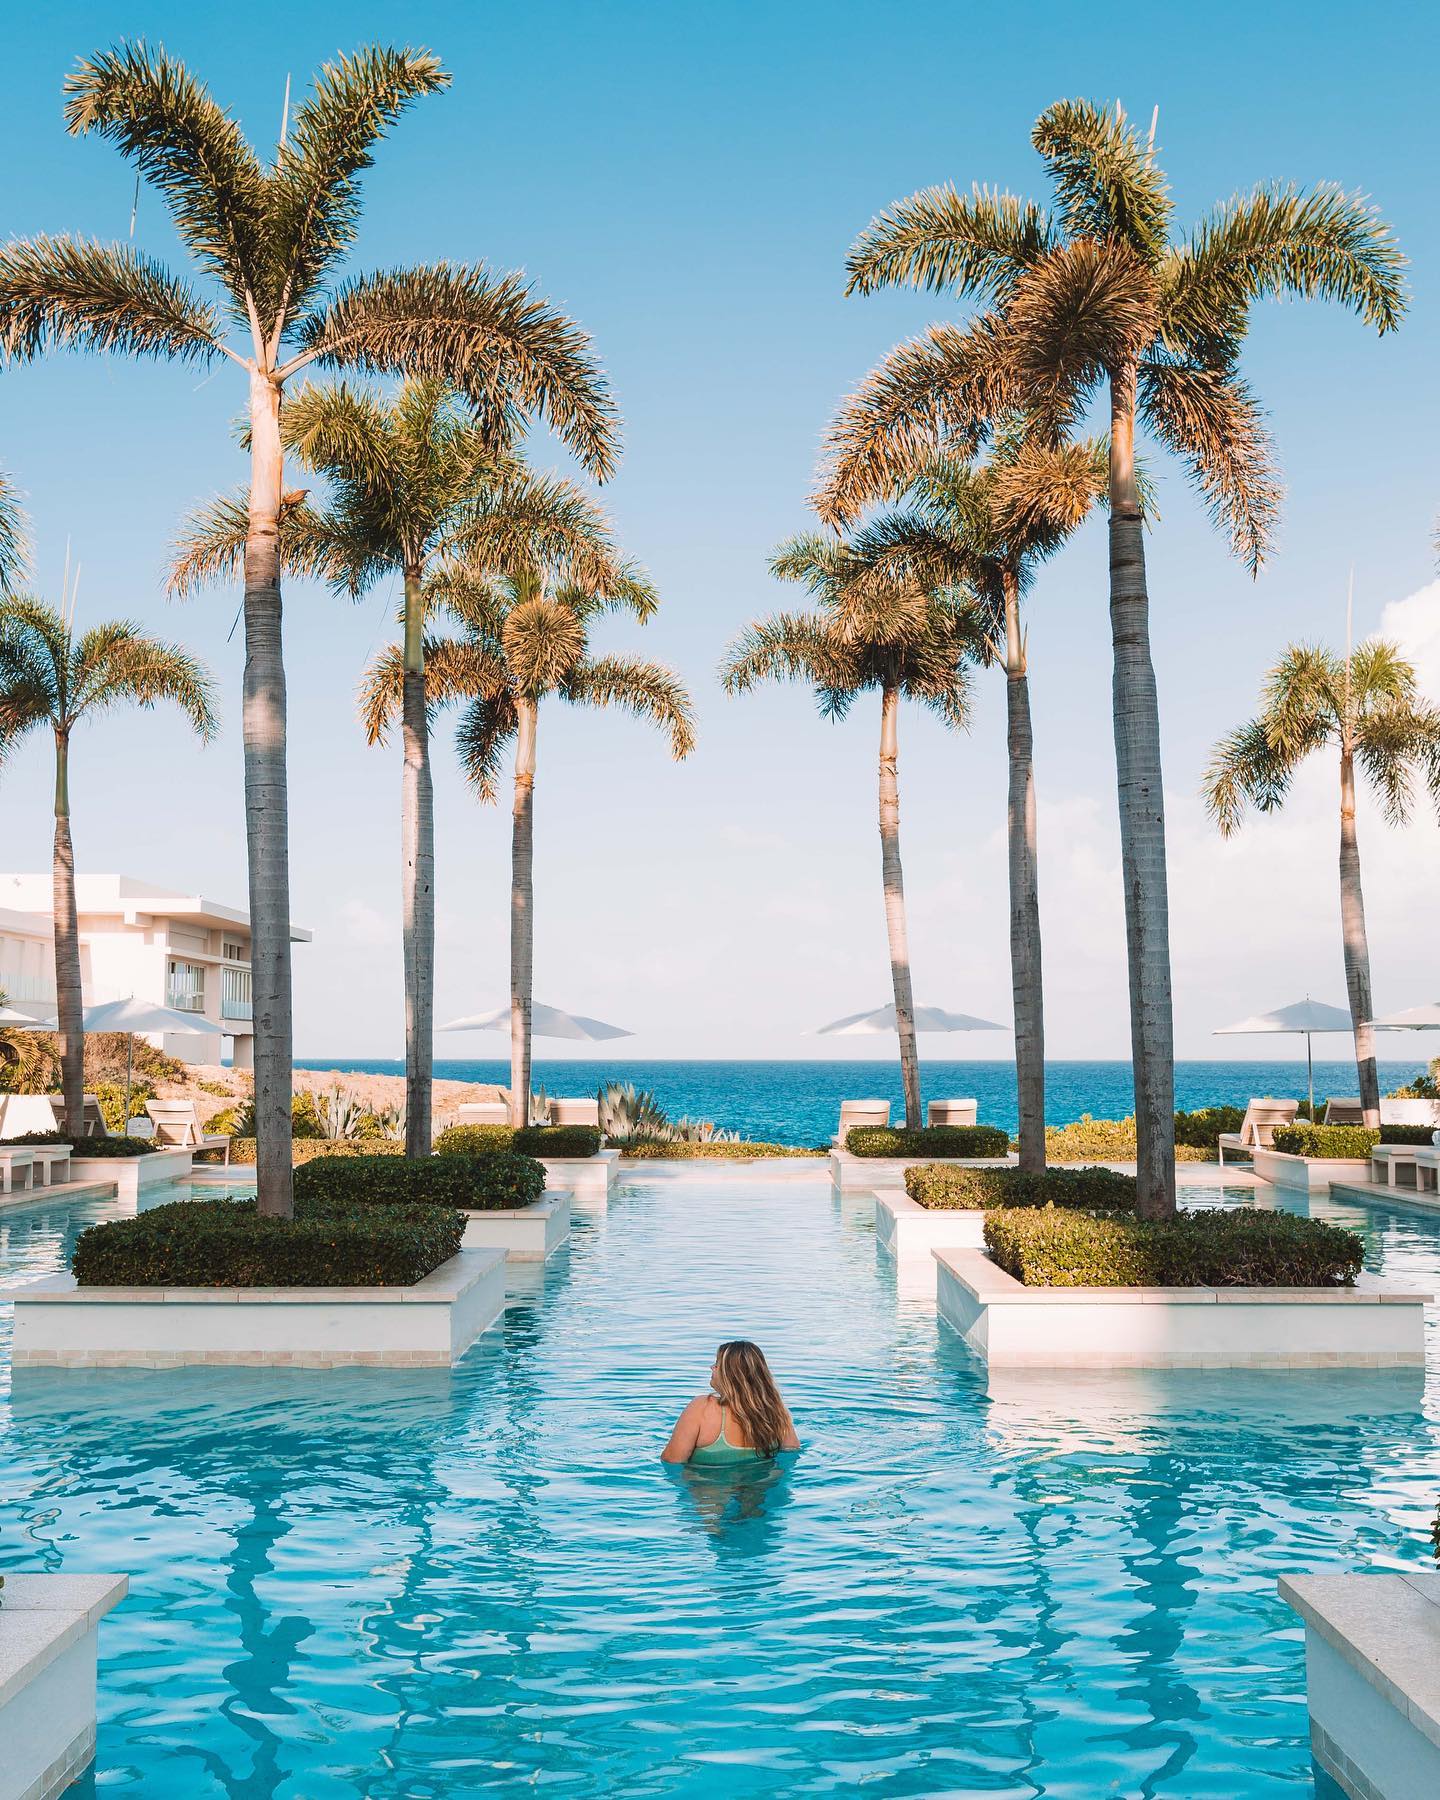 Did anybody else wish for this view at @fsanguilla for Christmas? 💦 Wishing I was back at this stunning resort! It’s been one of my favorite Four Seasons resorts I’ve been to, and how’s the perfect time to plan your visit for 2022!Four Seasons Anguilla is currently running a 6th night free promotion on stays. The promotion is good for the majority of 2022 (until 12/16!) so you can have your pick of dates. I was so blown away with not only the beauty of this resort, but the island of Anguilla as a whole. Plus - there’s nobody there! If you’ve ever wanted insanely beautiful white sand beaches and crystal clear turquoise water all to yourself, Anguilla is the place for you 😍So who’s booking themselves here for 2022?! Make sure to send me an invite 😉 #FSAnguilla #fourseasons #fourseasonsanguilla #anguilla #visitanguilla #anguillabeaches #caribbeanislands